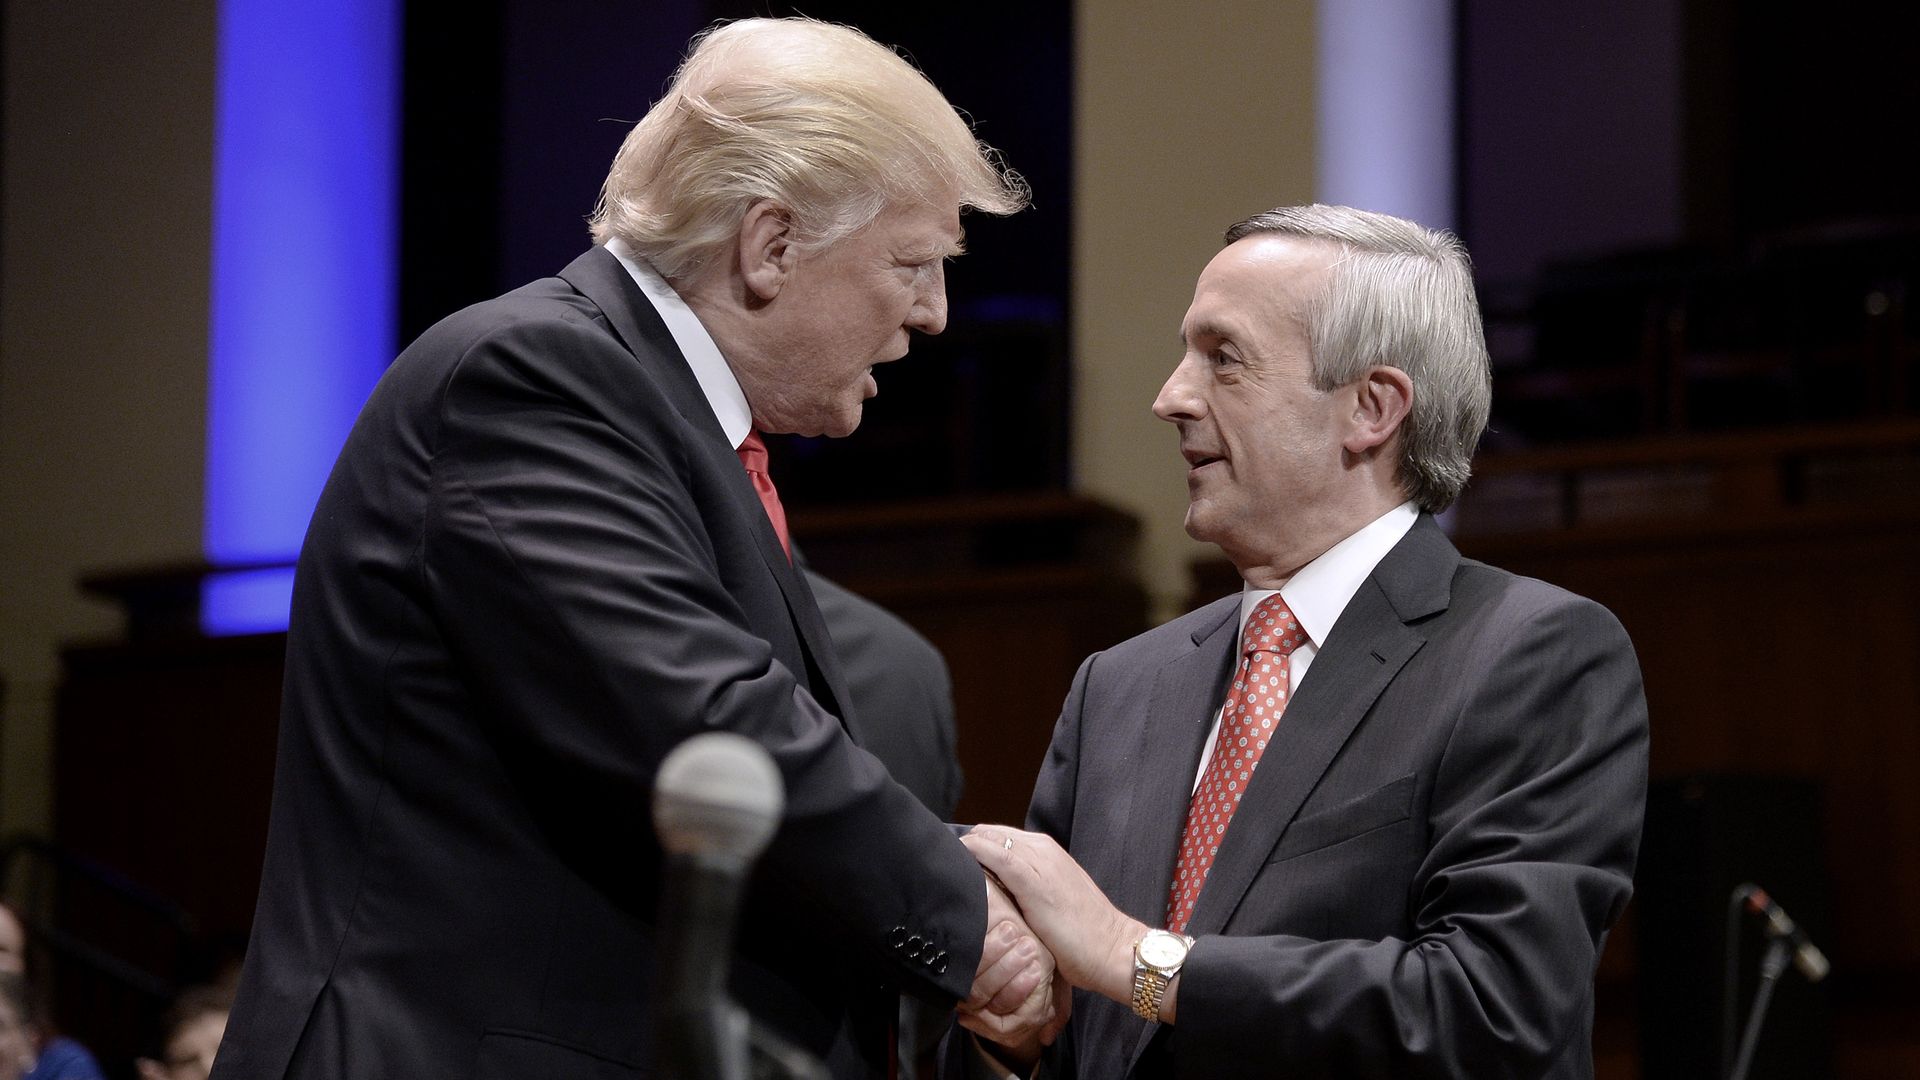 Trump and Jeffress shaking hands